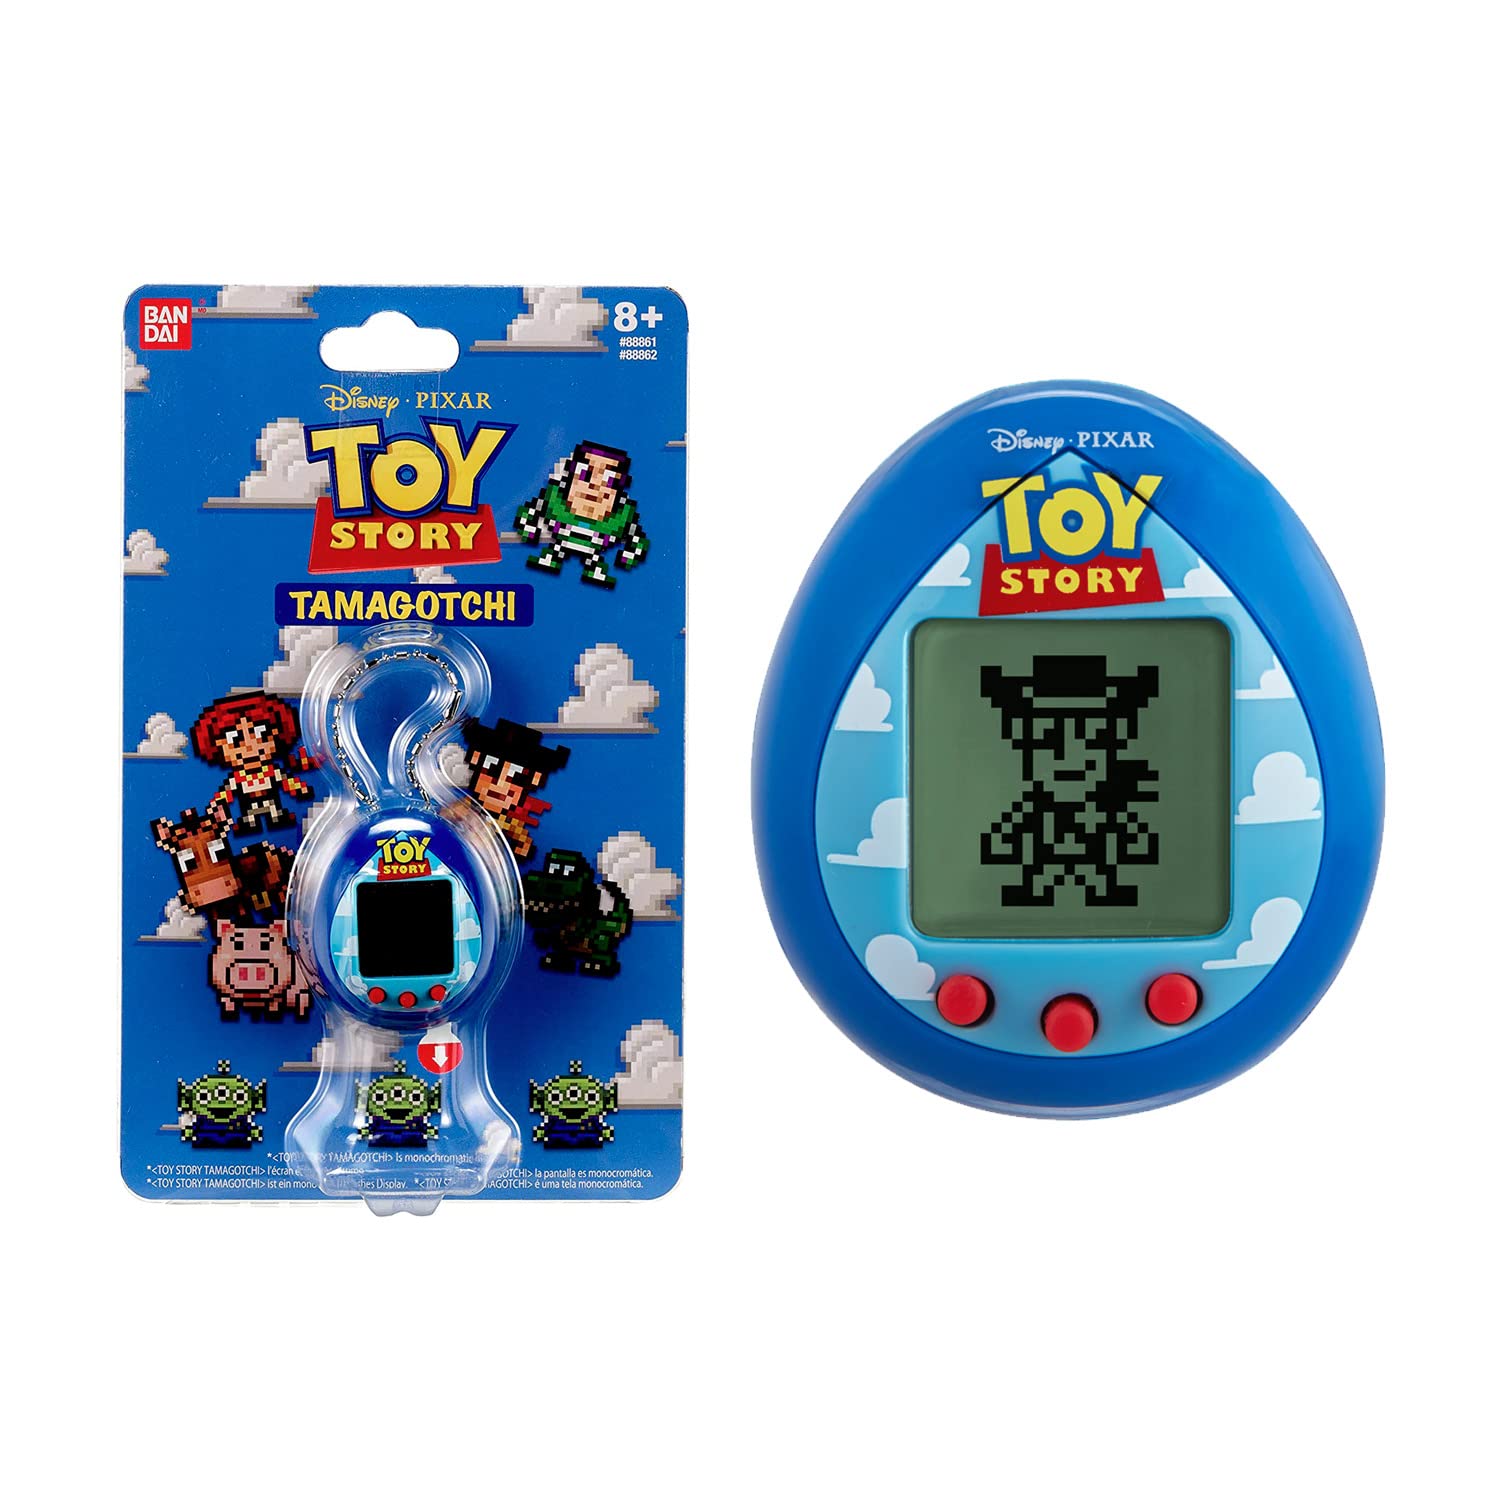 Tamagotchi Nano Toy Story Clouds Version | Toy Story Hand Held Games Machine | Virtual Pet Original Toy Story Characters Including Woody and Buzz Lightyear | 90s Toys for Kids and Adults